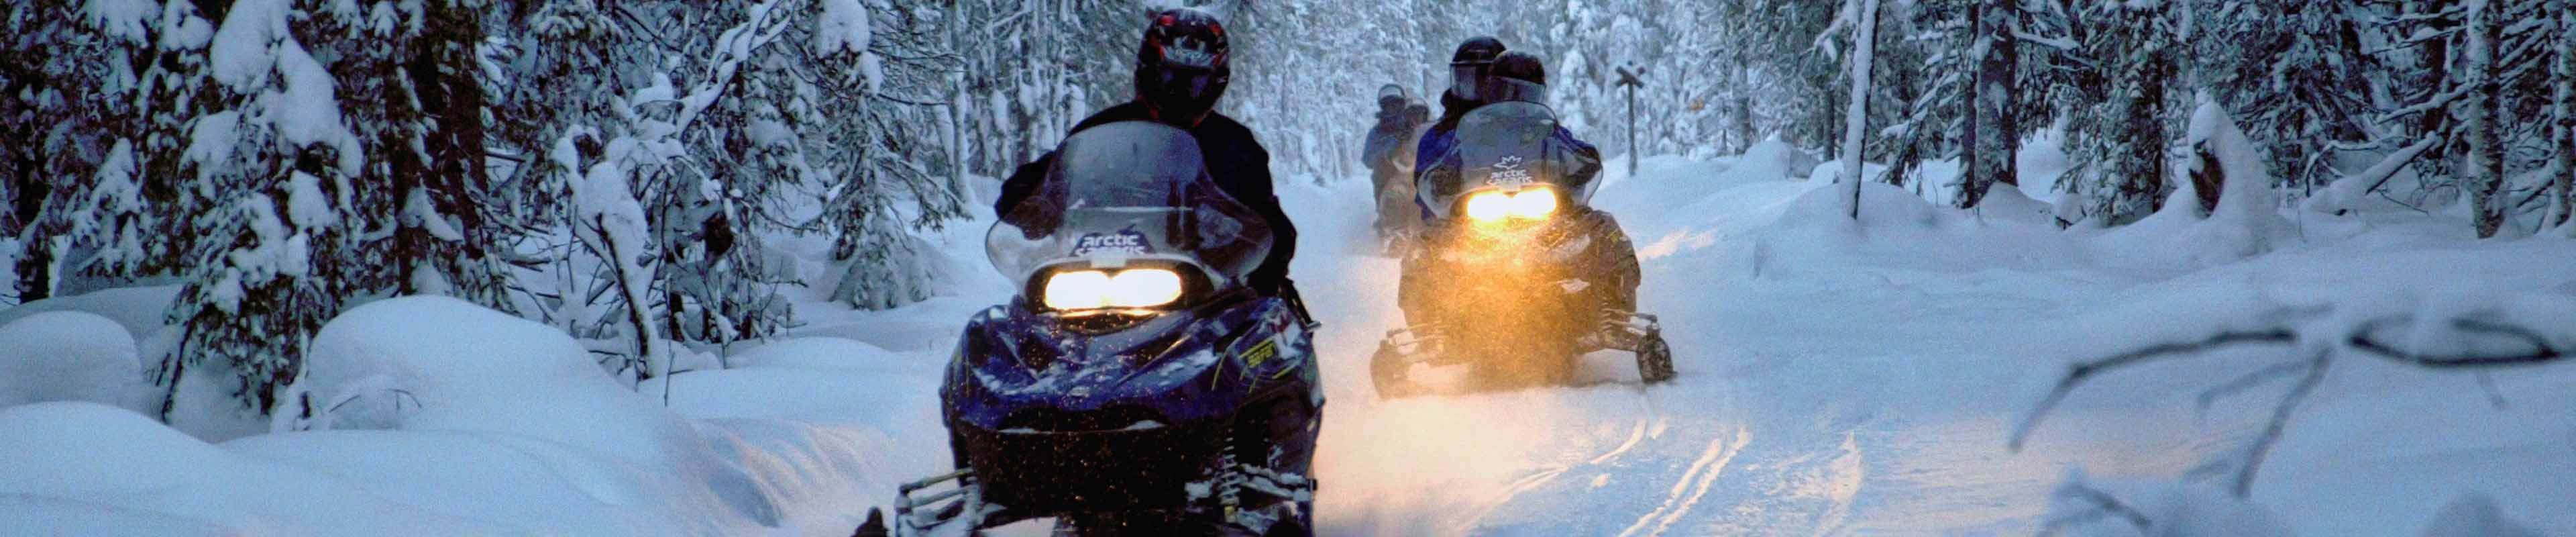 snowmobiles on a snowy trail at night 